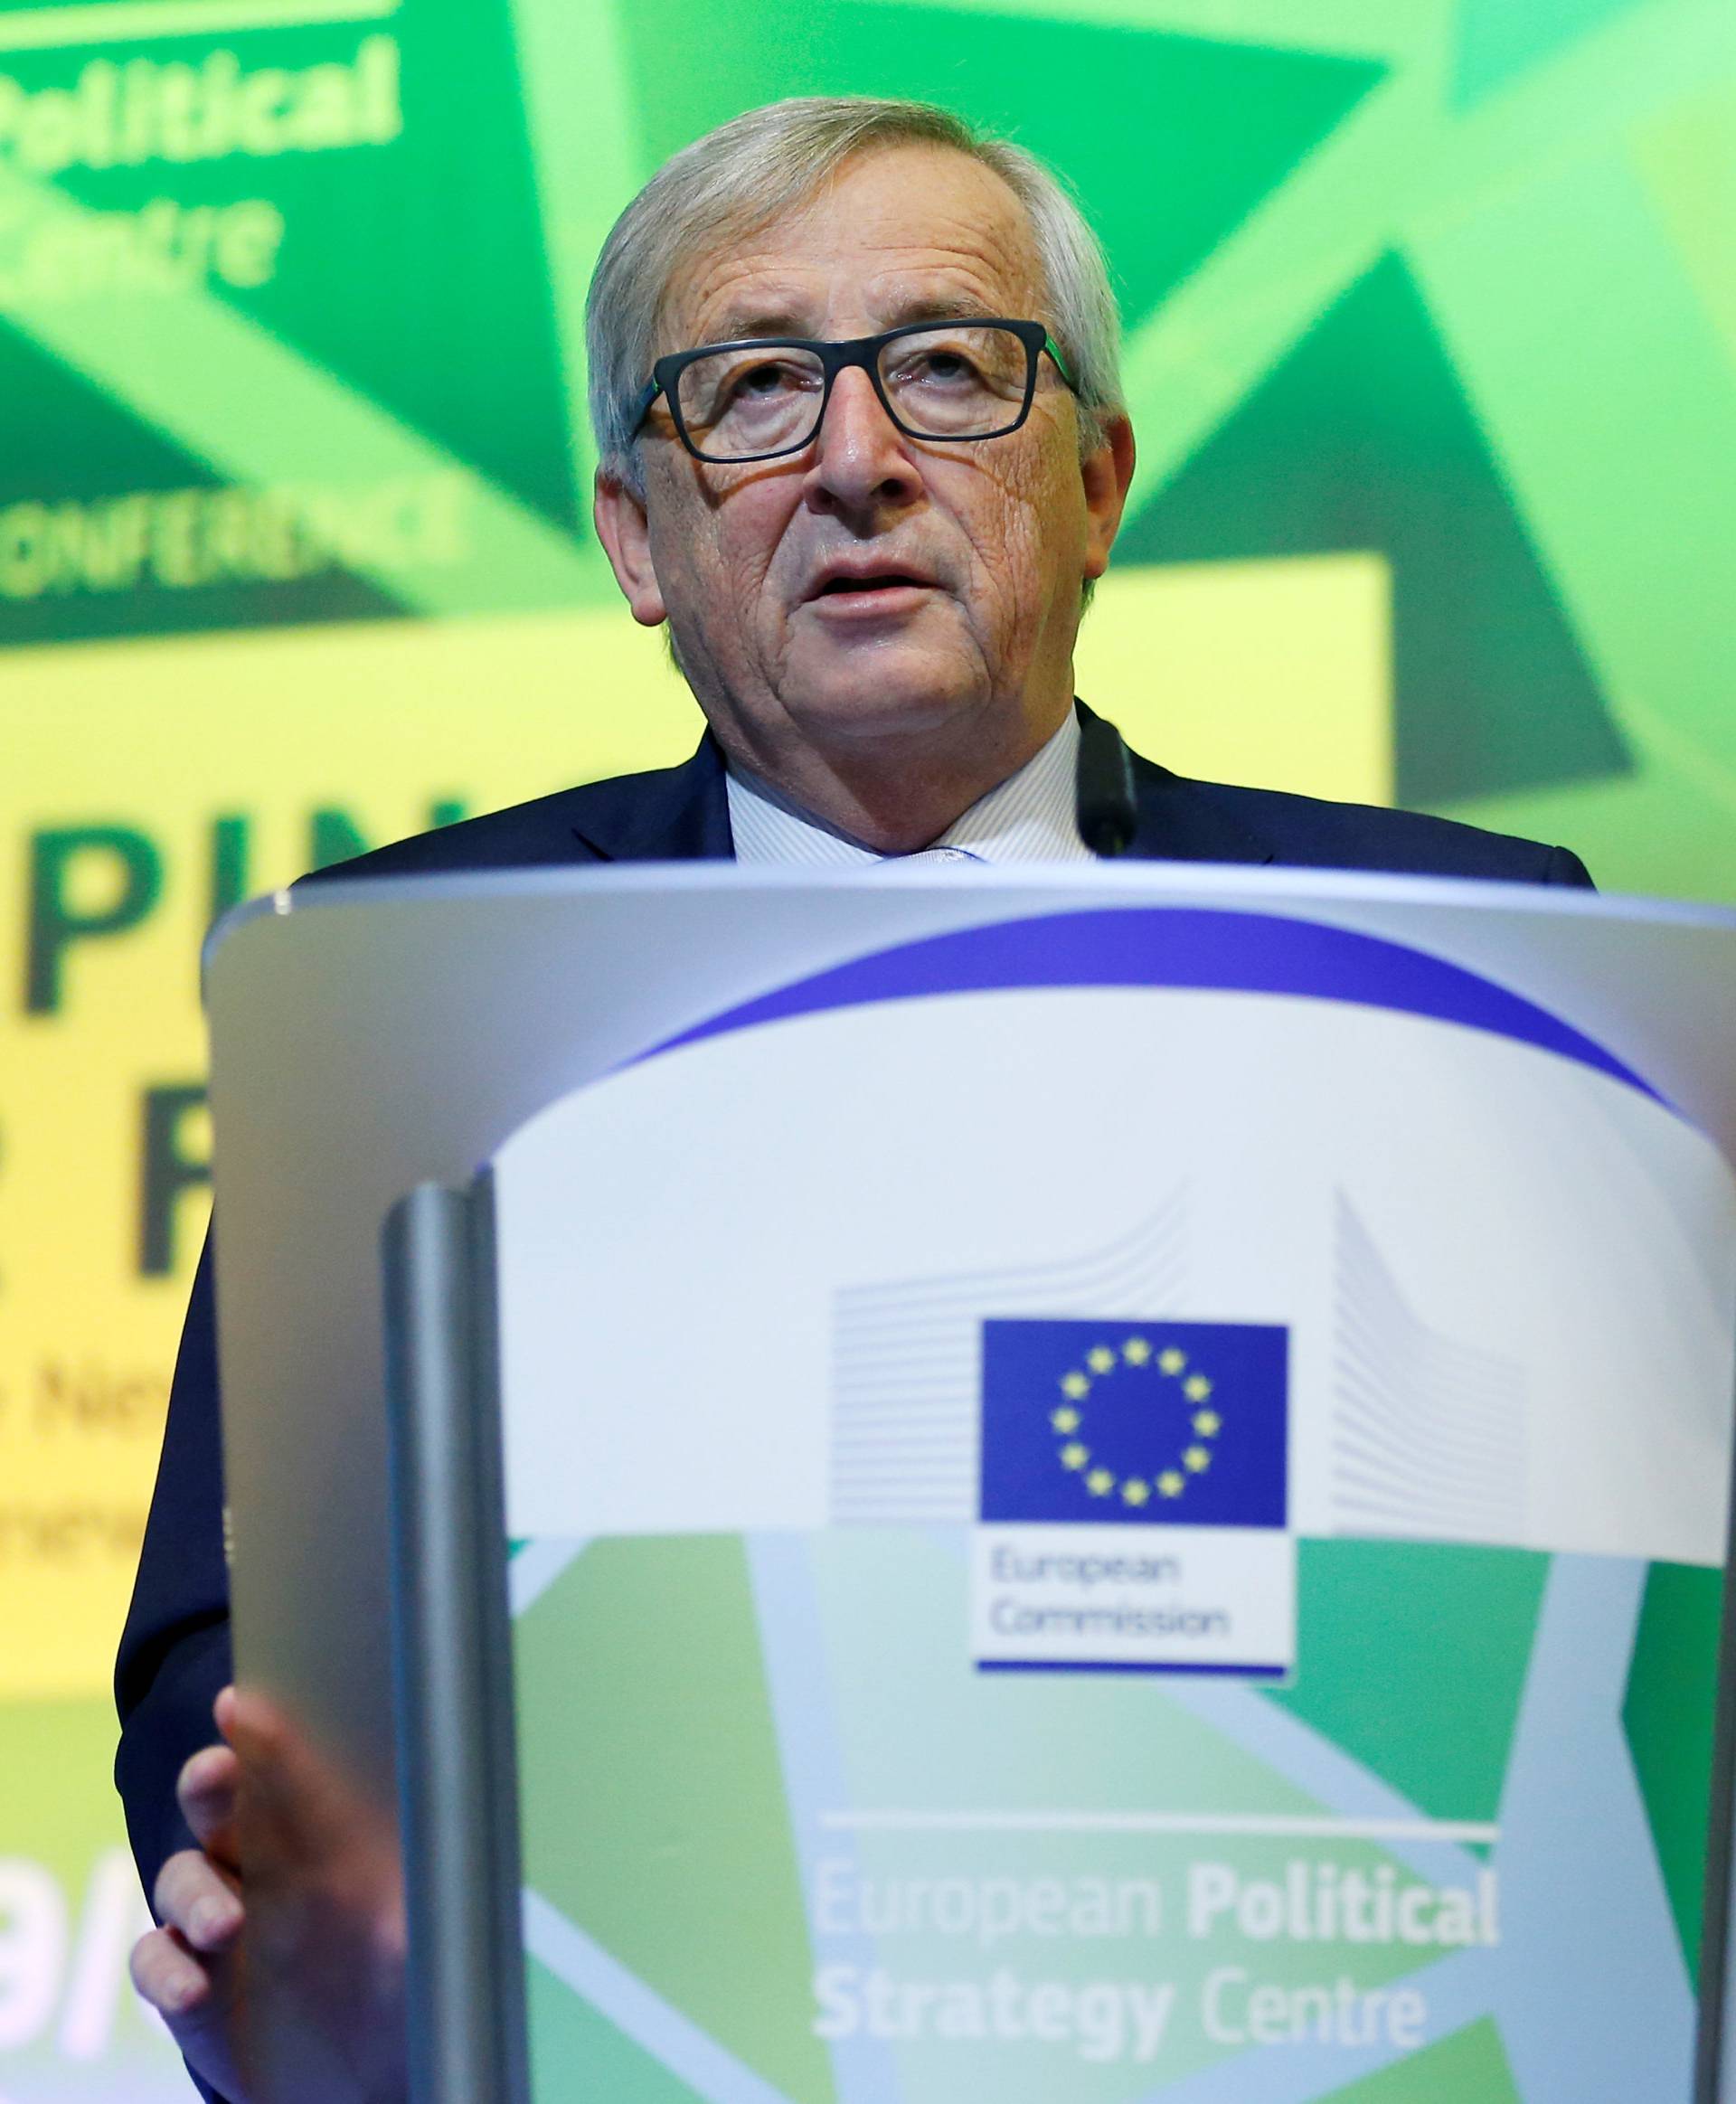 EU Commission President Juncker delivers a speech at a conference on the EU's next long-term budget after Brexit in Brussels